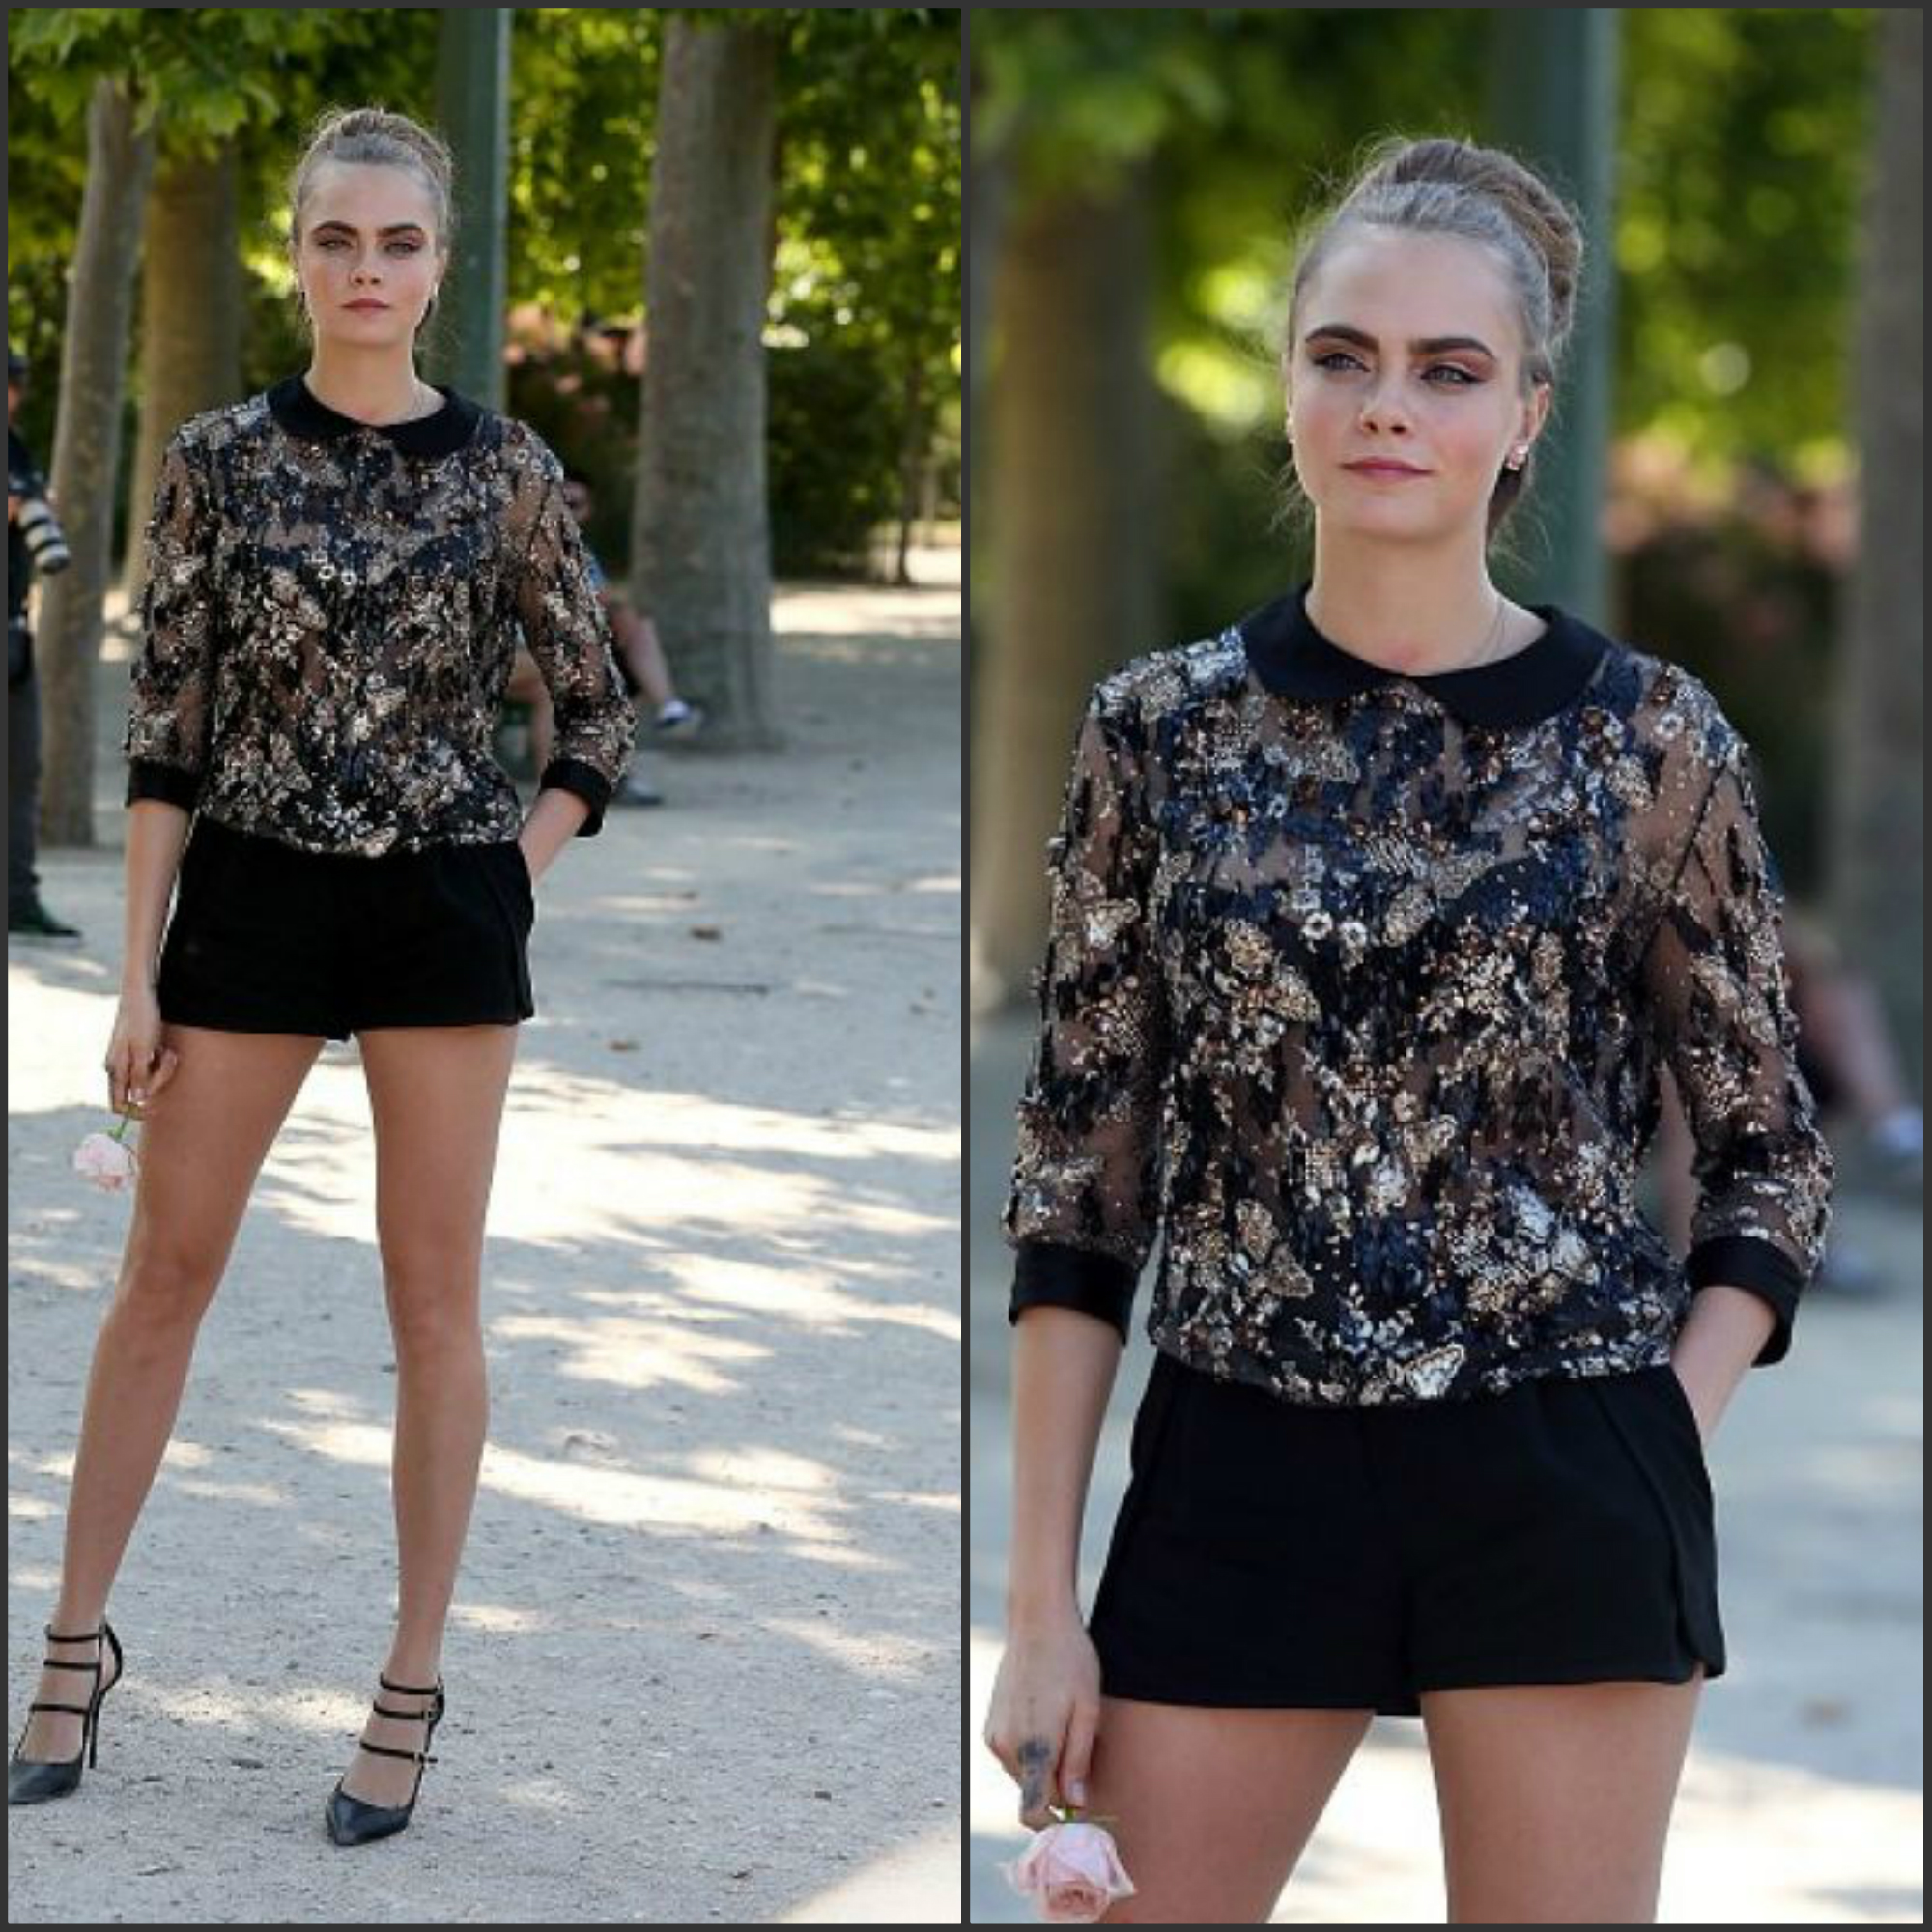 cara-delevingne-in-Jenny-Packman-and-elie-saab-paperptowns-paris-photocall